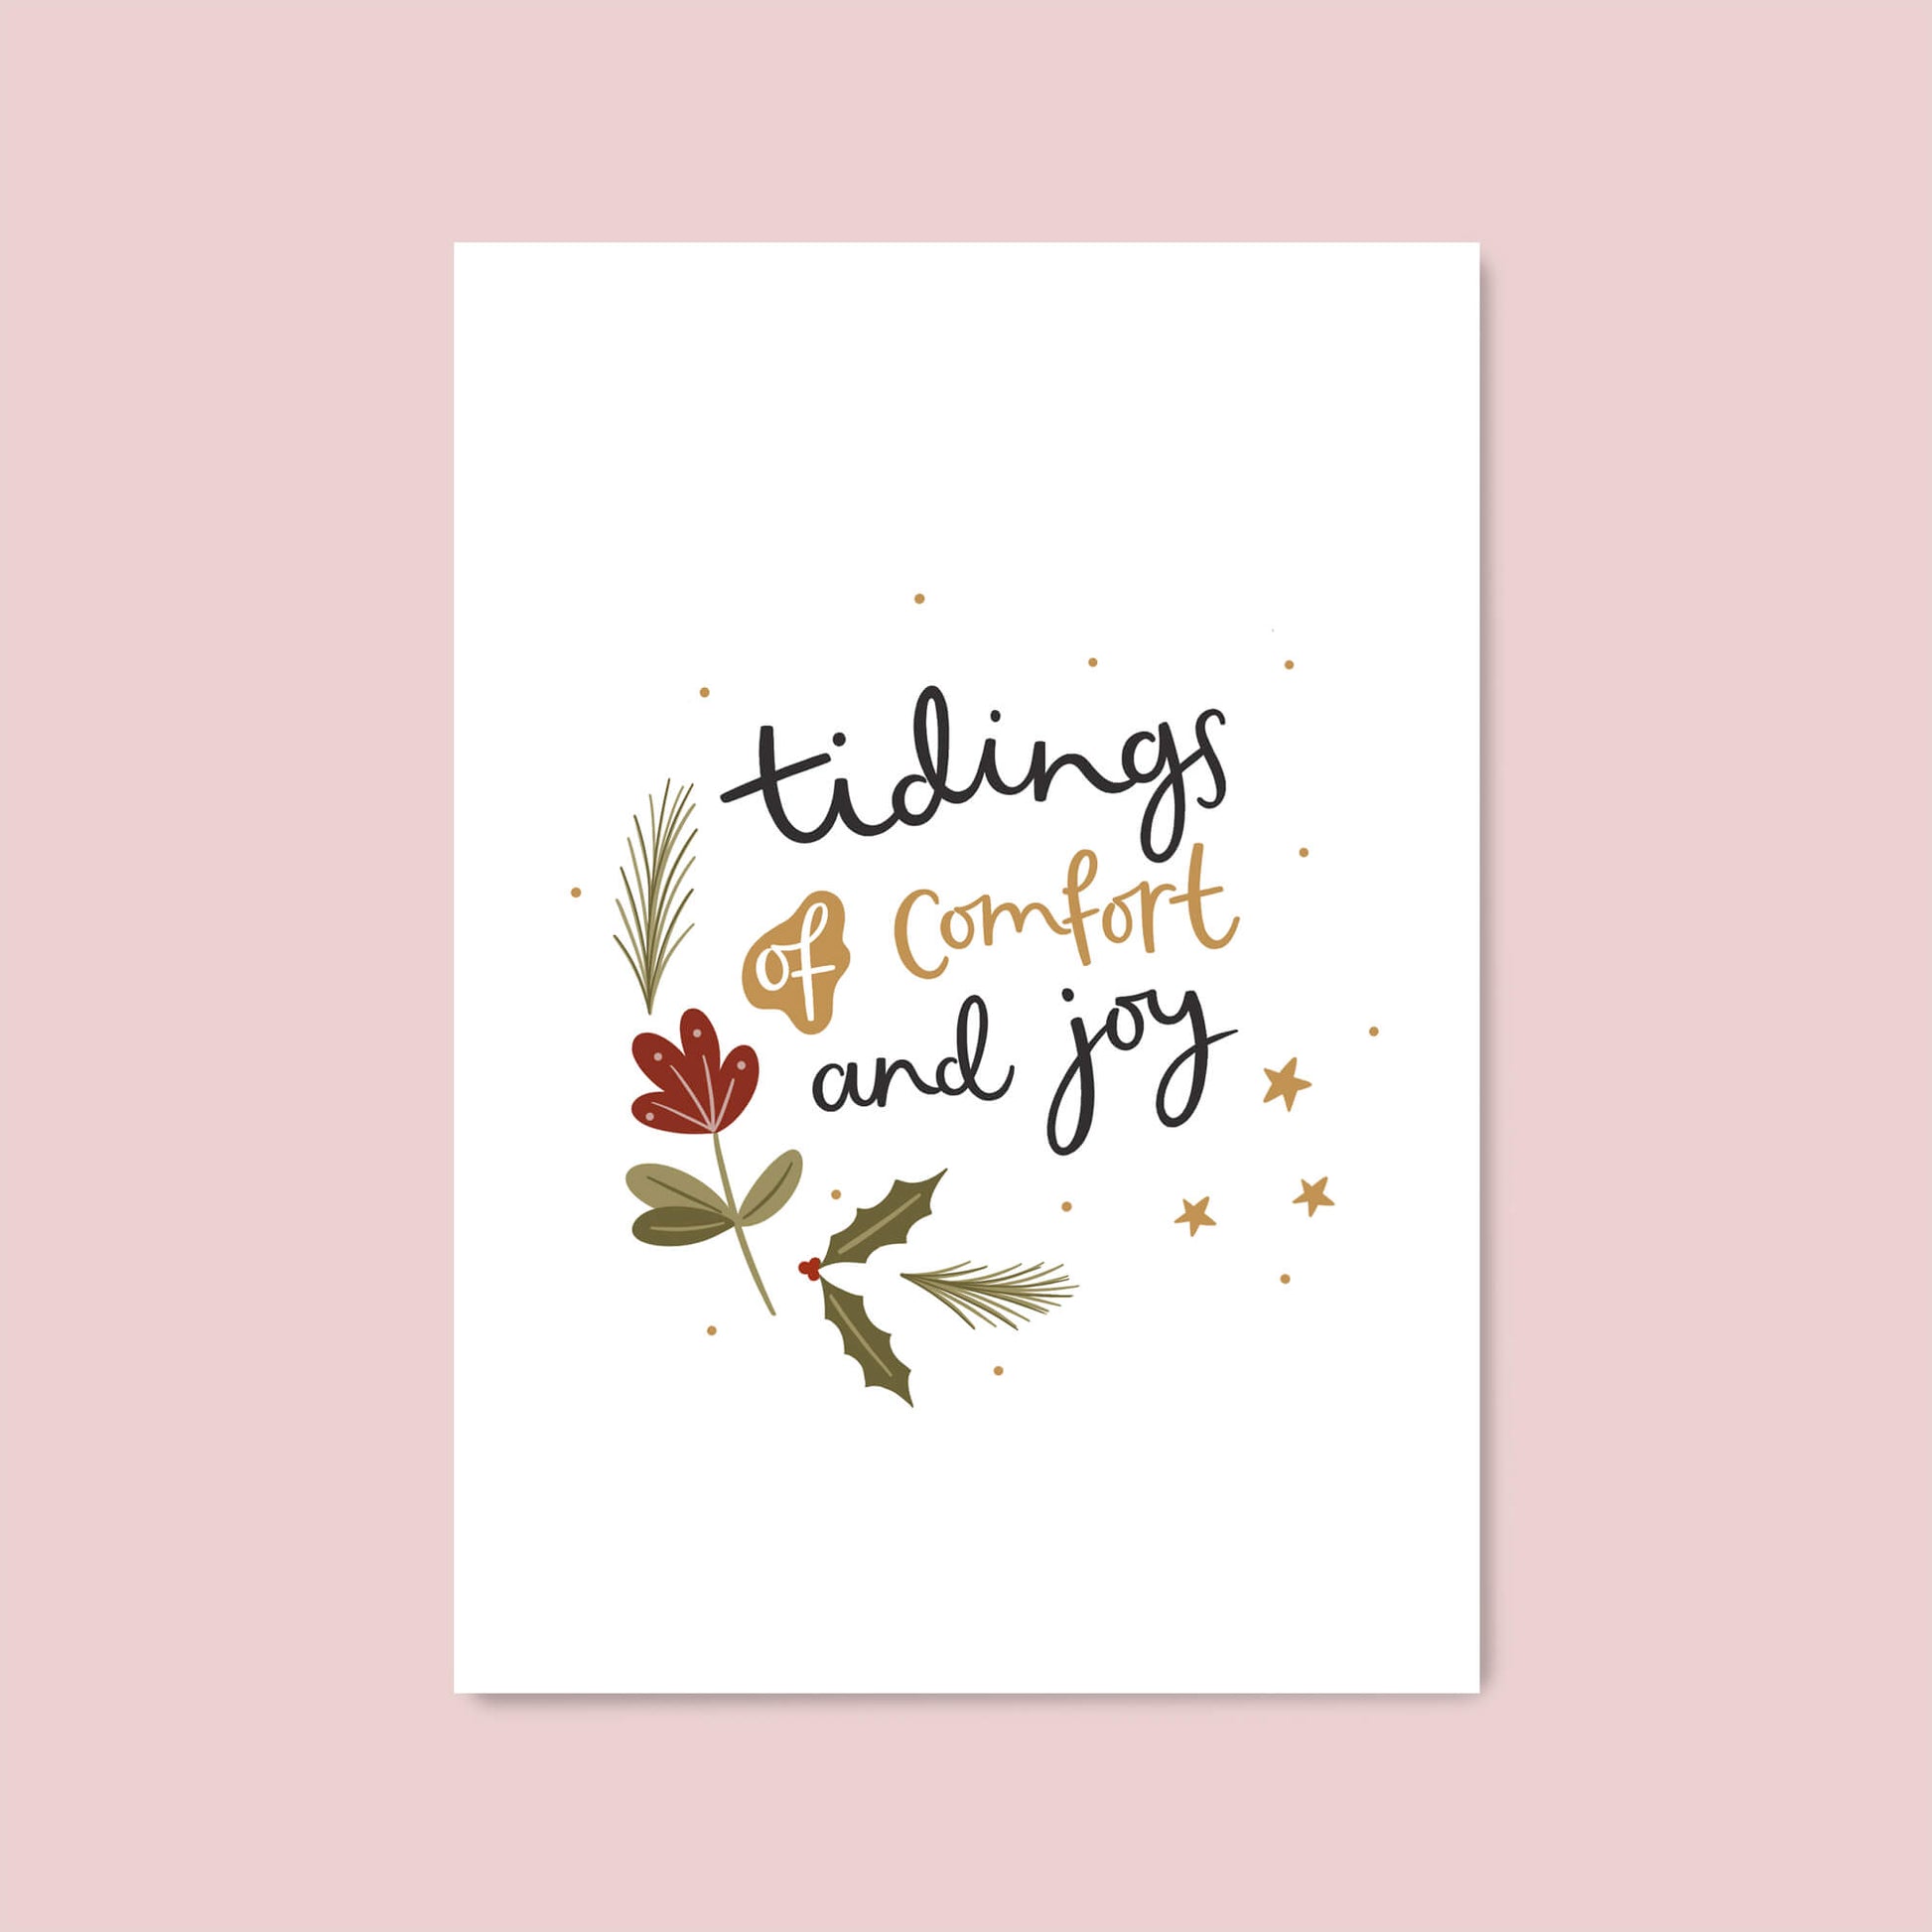 tidings of comfort and joy christmas print by abbie imagine